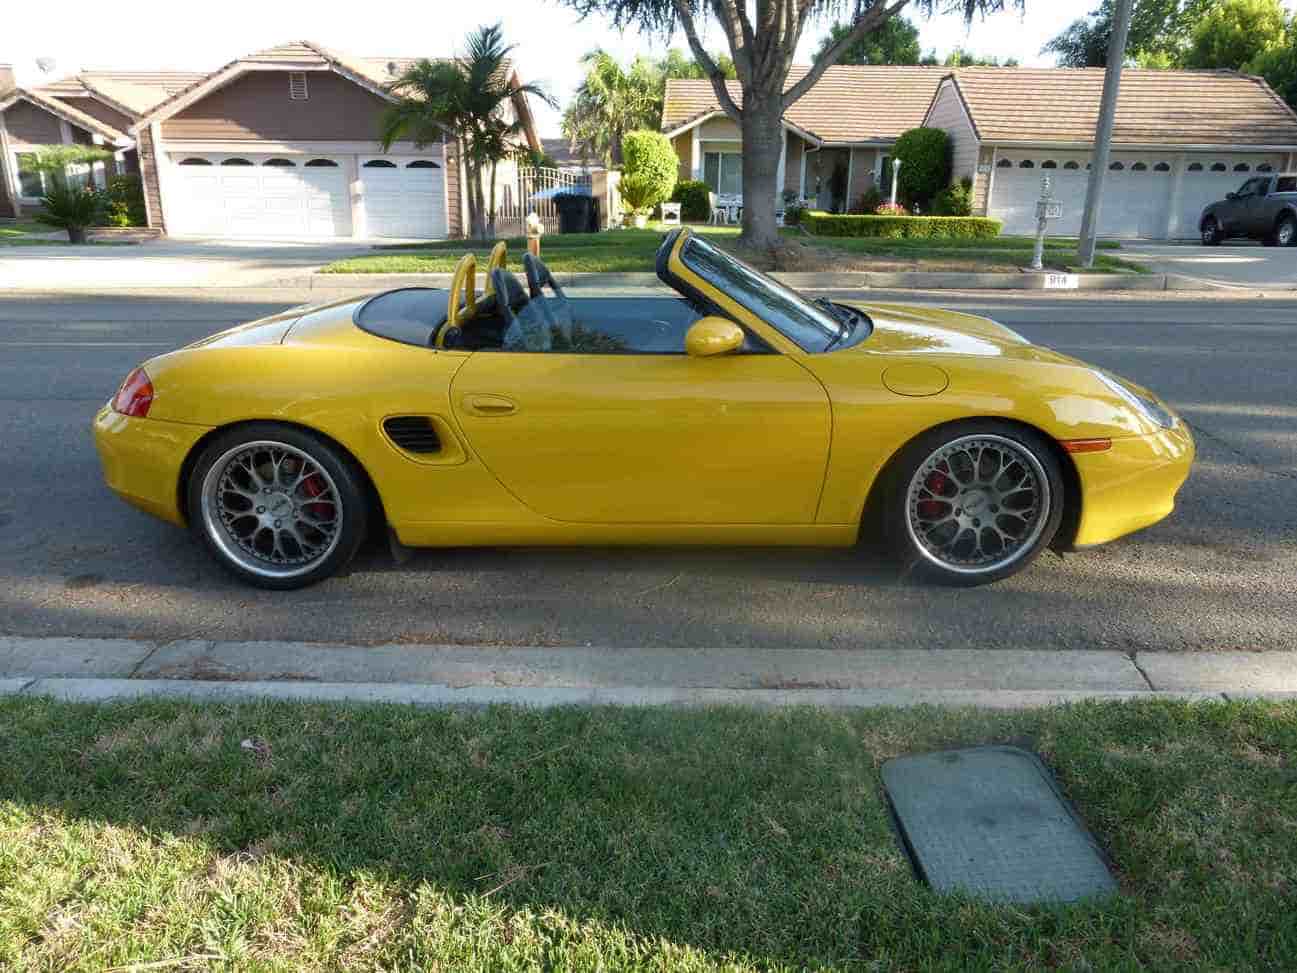 2000 Porsche Boxster - WTB: Looking for a particular 2000 Speed Yellow Boxster S - Used - 6 cyl - 2WD - Manual - Convertible - Yellow - San Jose, CA 95134, United States